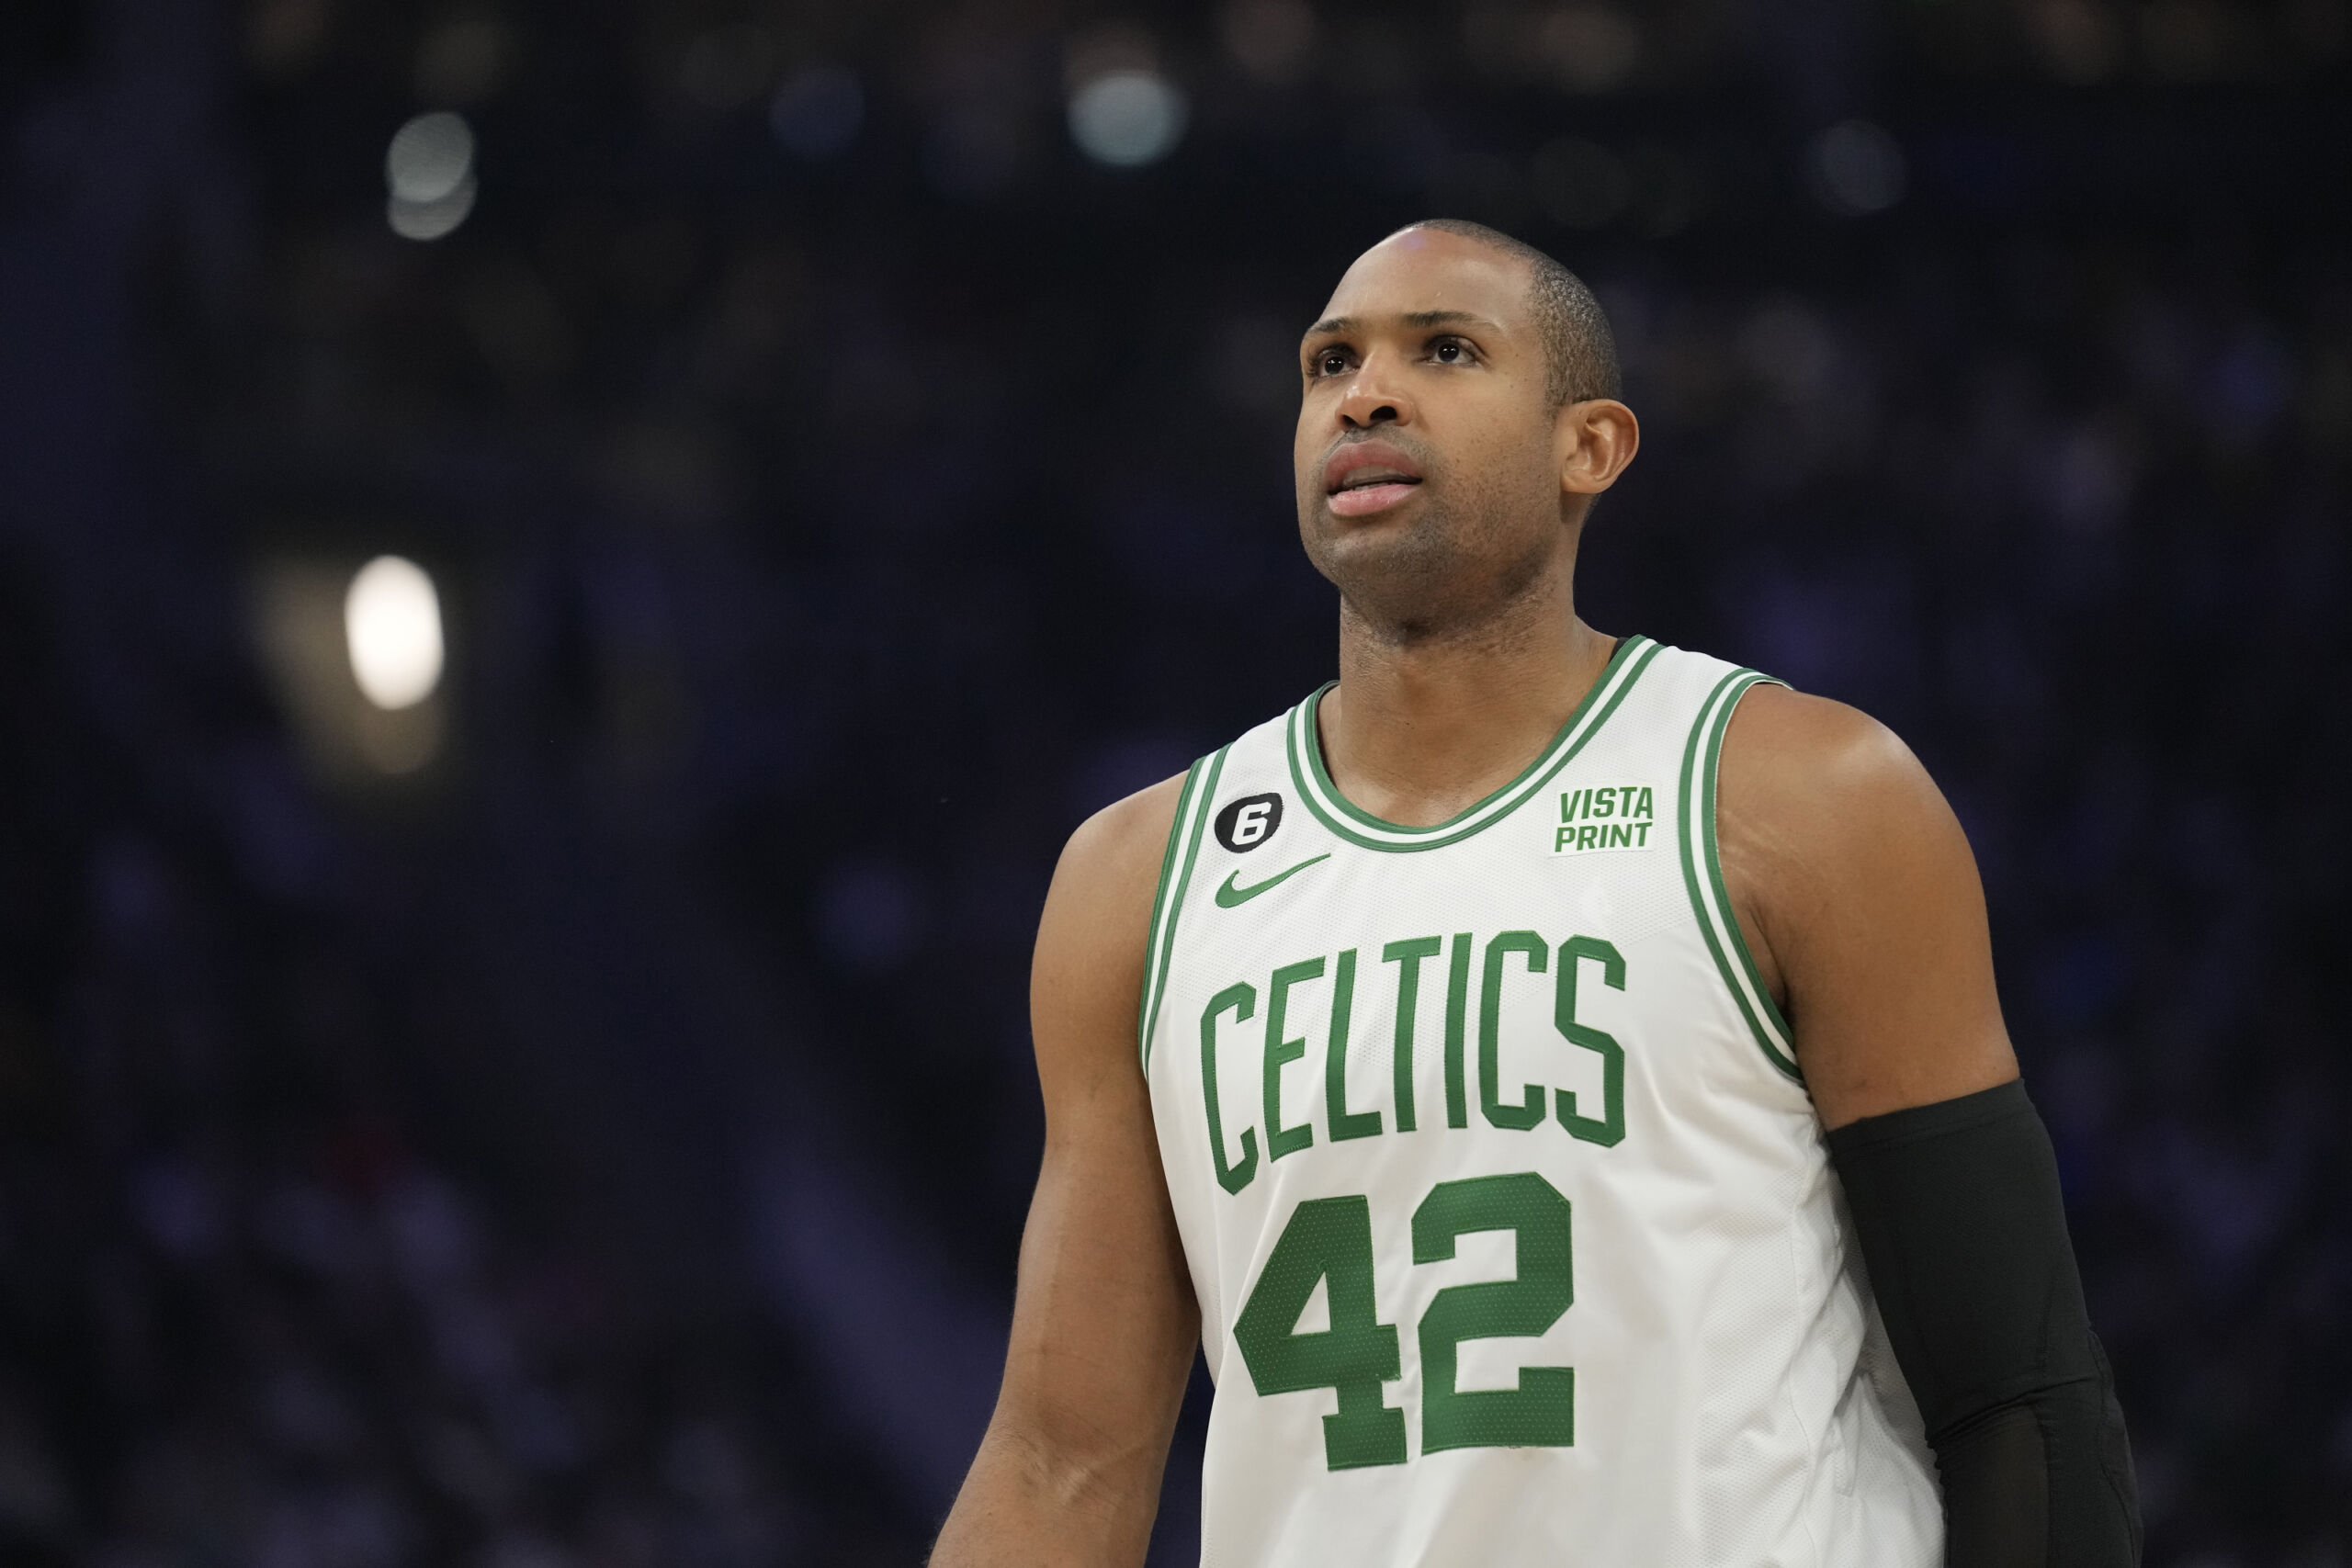 Al Horford: Boston Celtics big man's NBA Finals appearance provides ideal  opportunity to cap 15-year career, NBA News